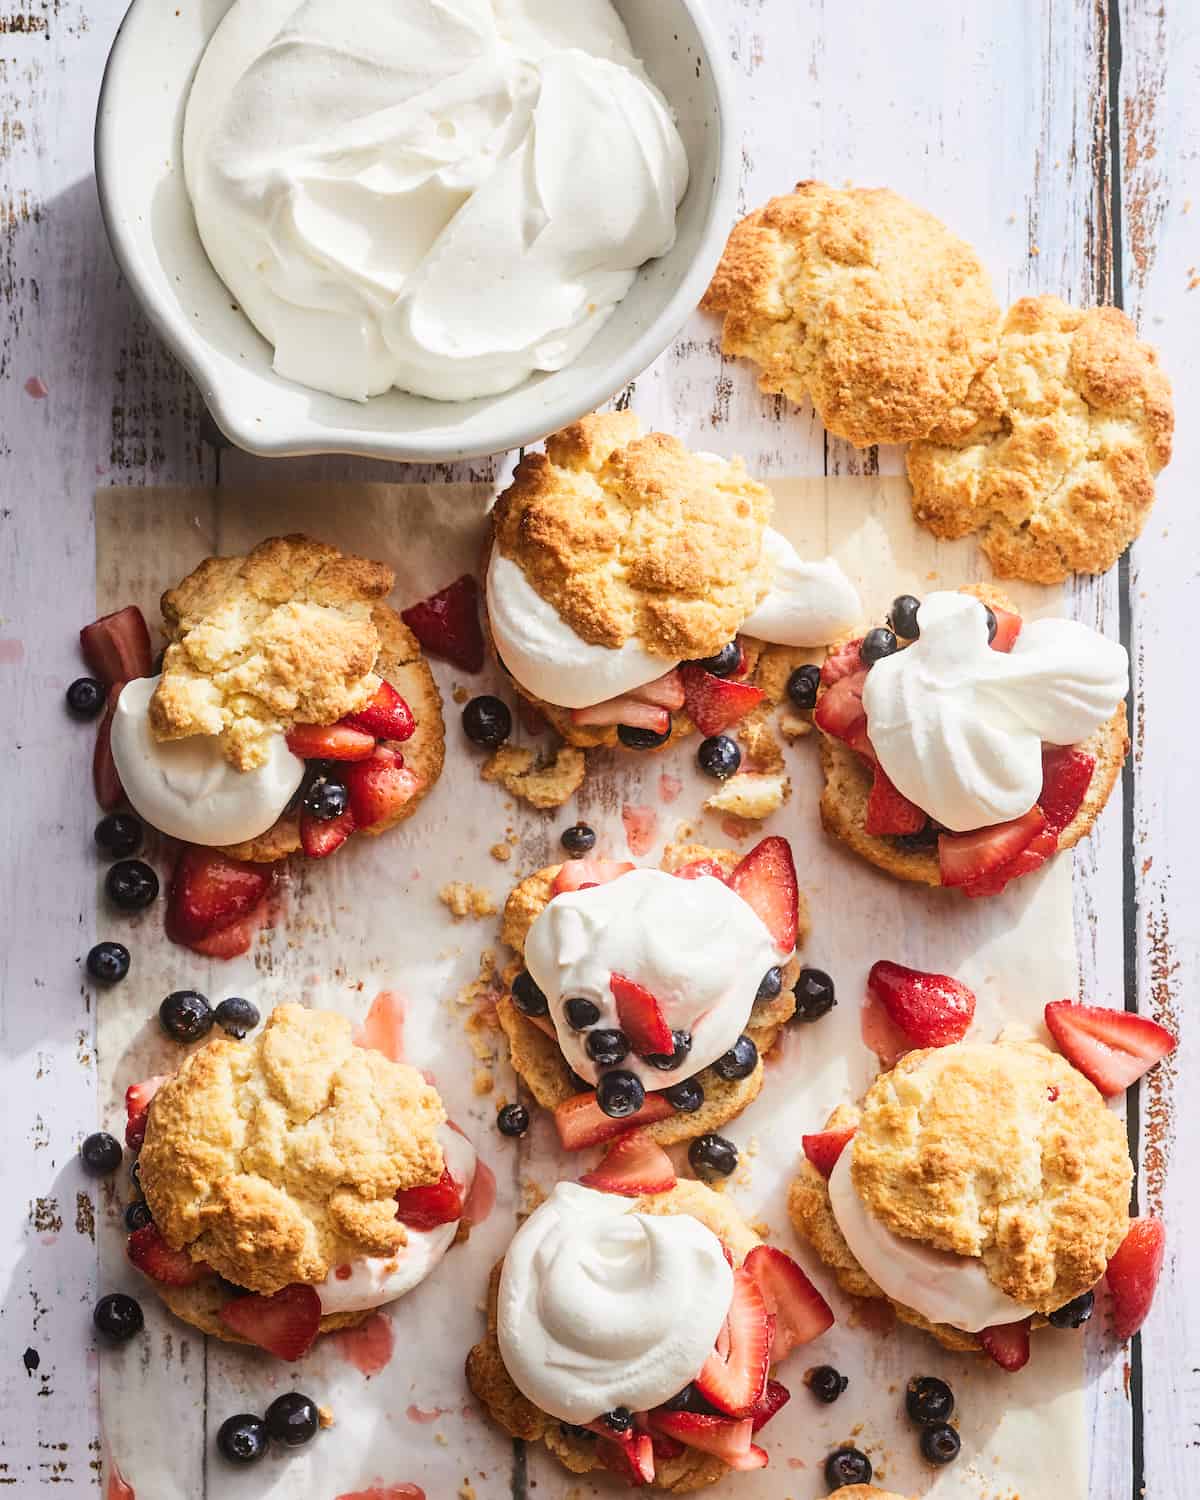 8 Strawberry shortcakes topped with whipped cream and blueberries sitting on some parchment paper next to a bowl of whipped cream.